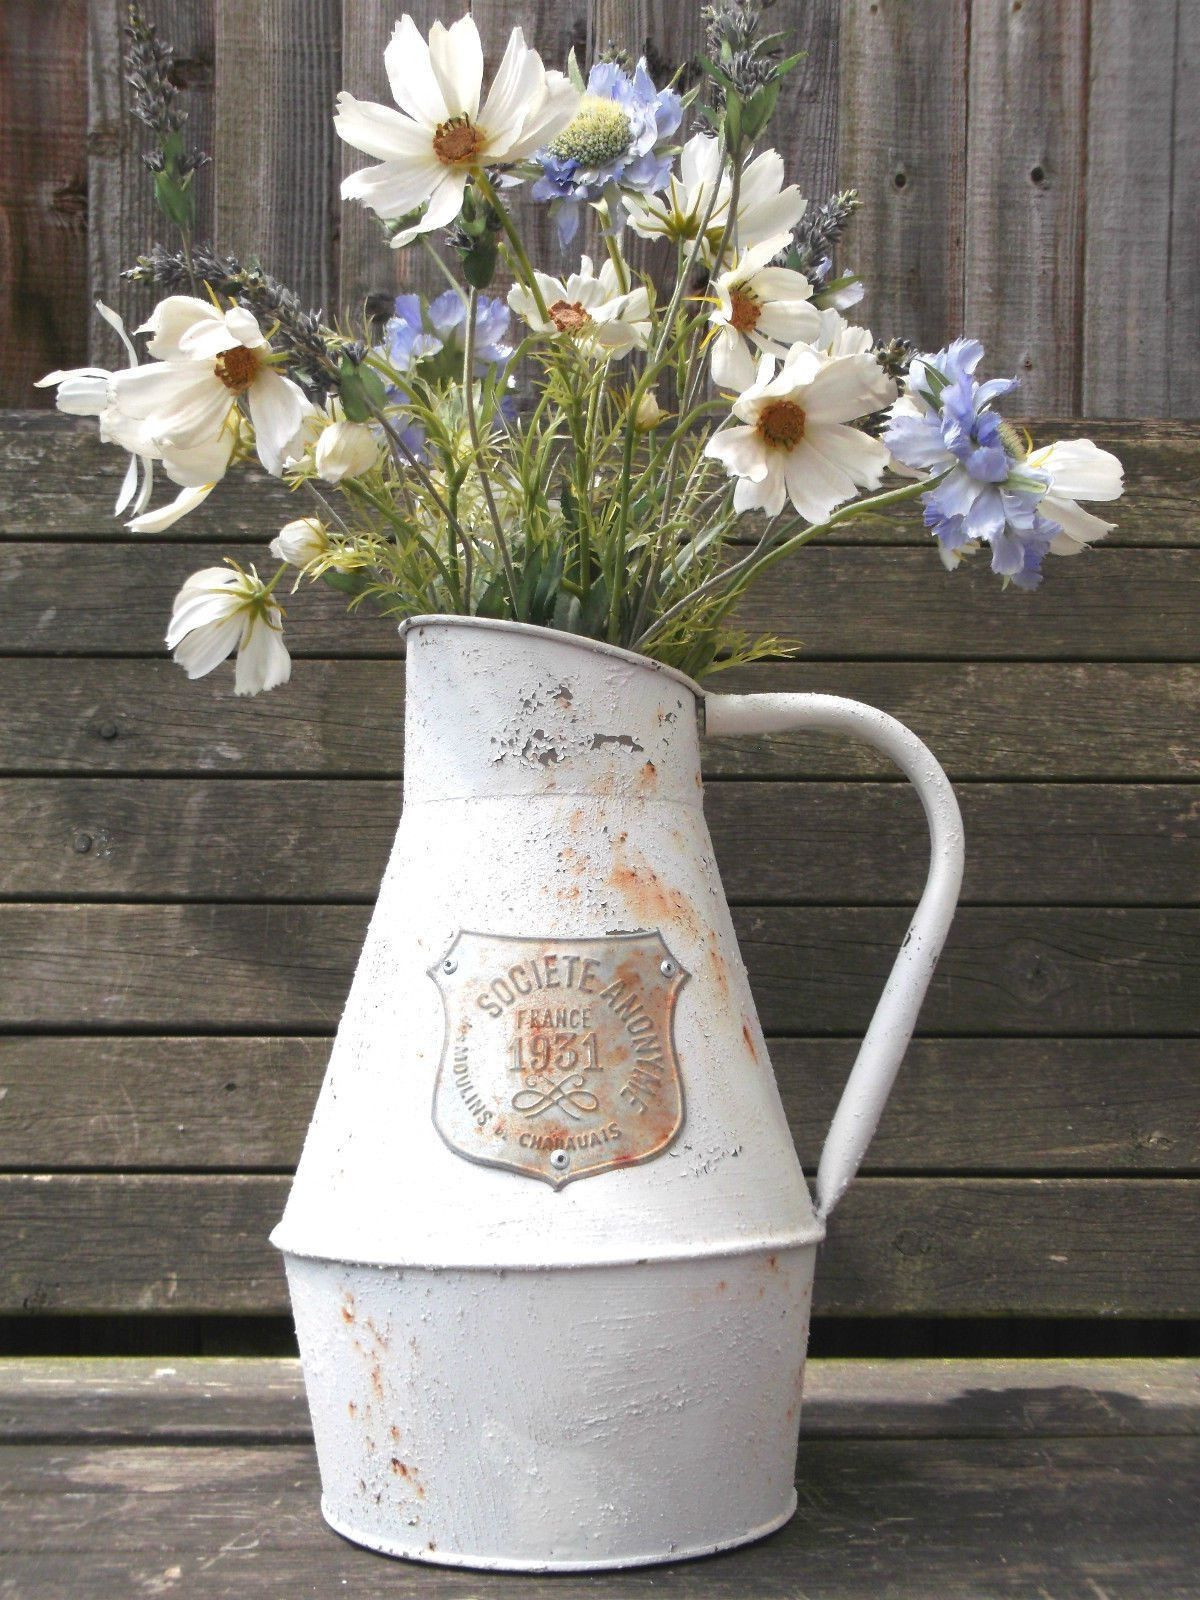 Blue and Brown Ceramic Vase Of 30 Copper Flower Vase the Weekly World with French Flower Bucket H Vases Galvanized French Vase Tin Bucketi 0d